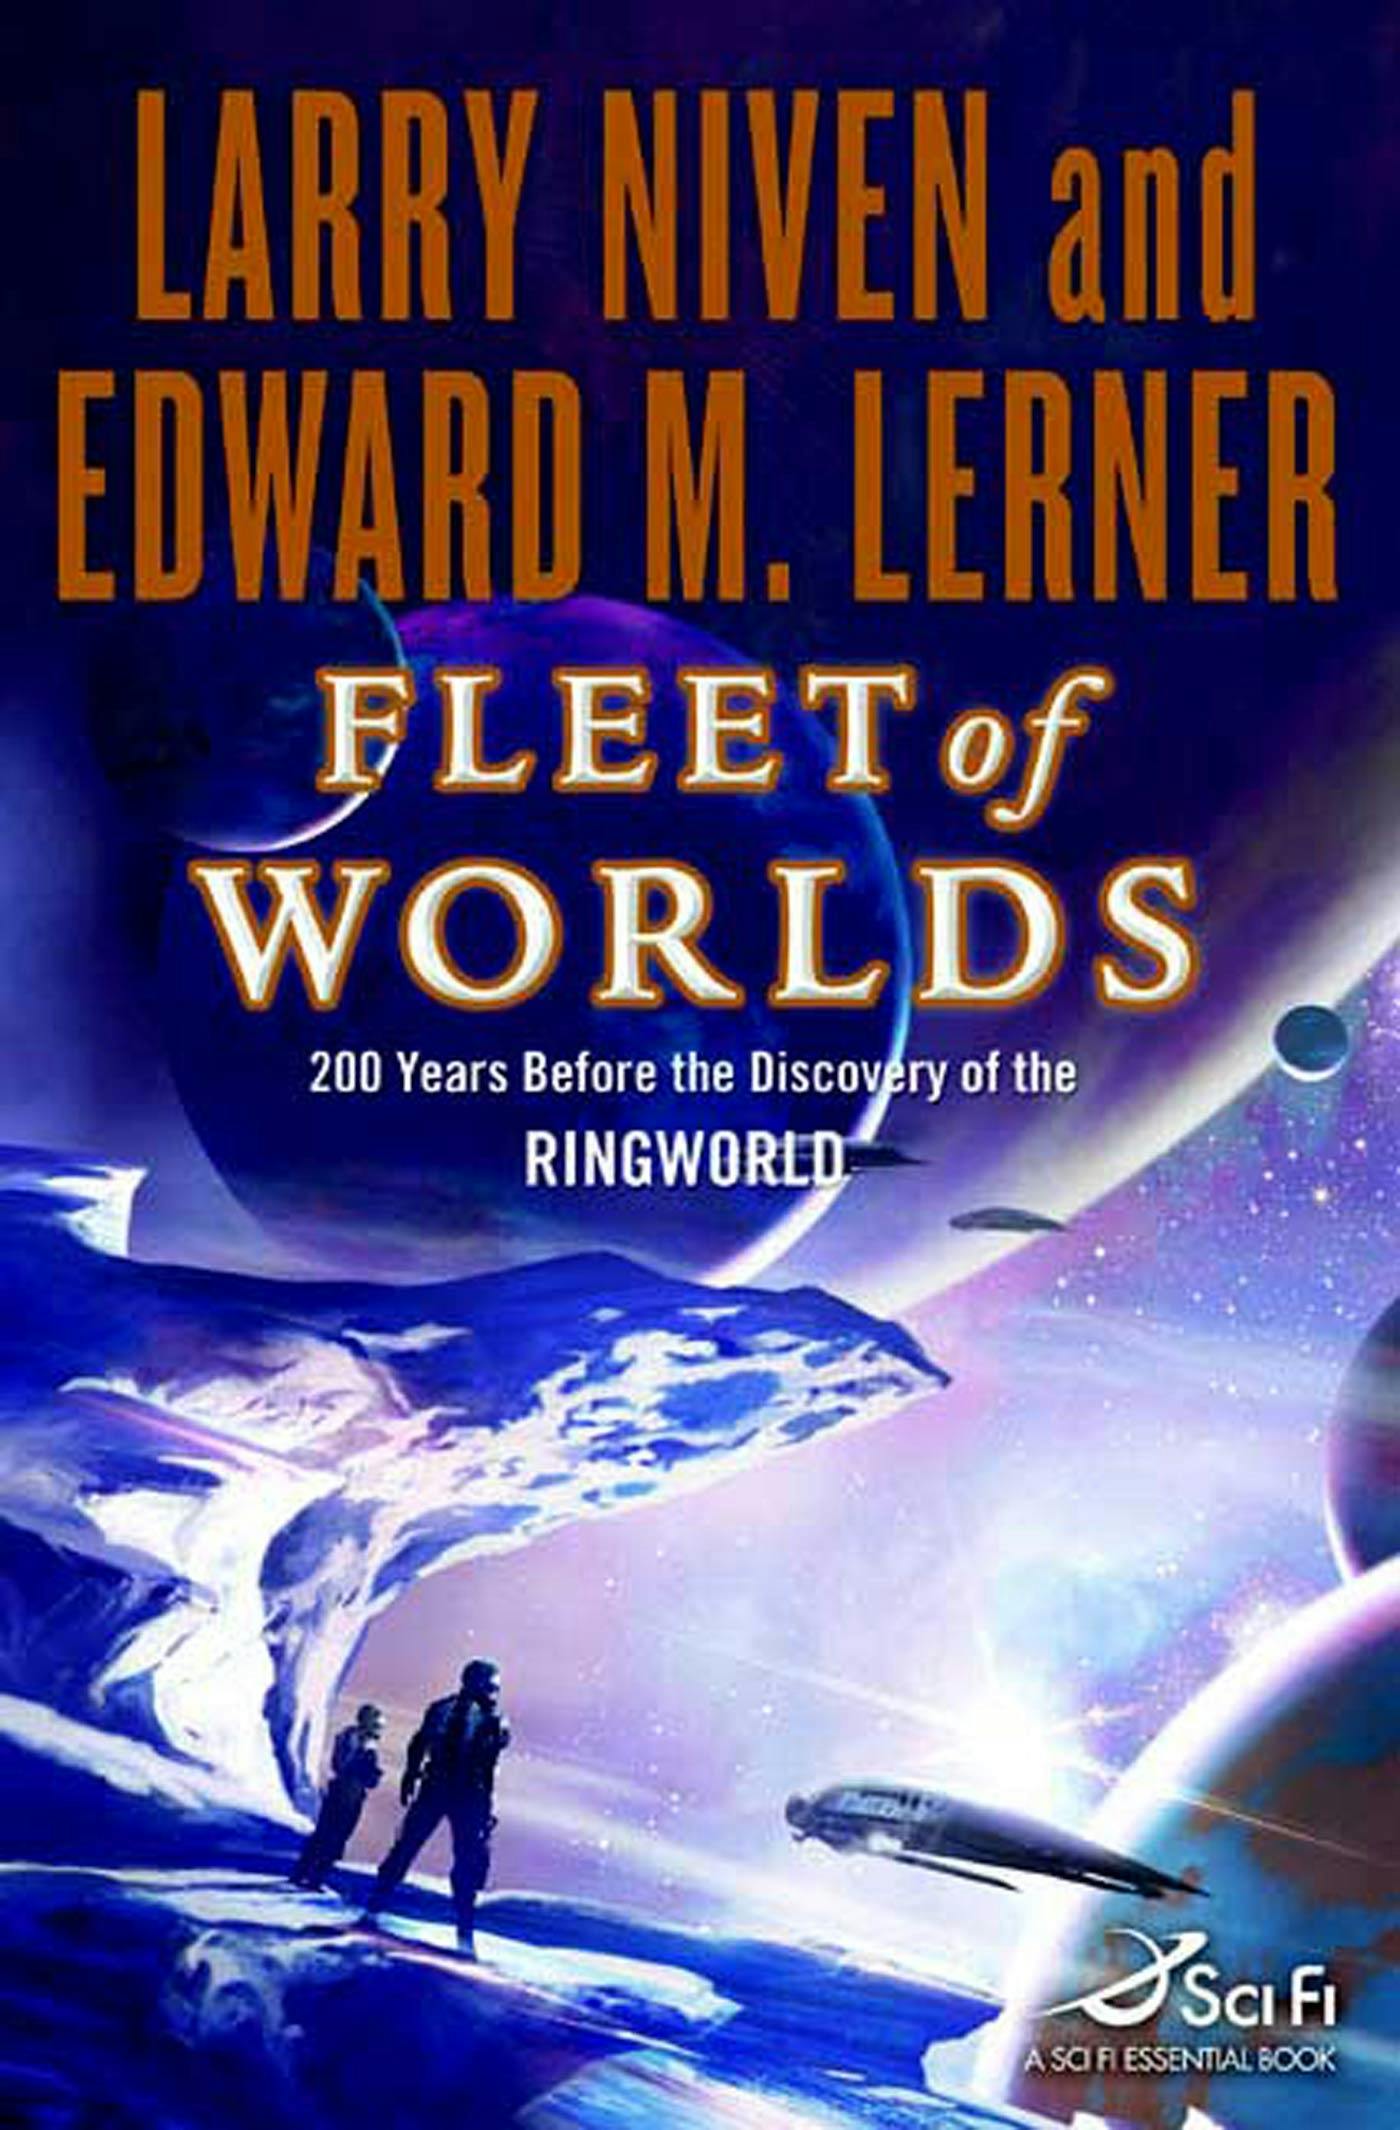 Cover for the book titled as: Fleet of Worlds